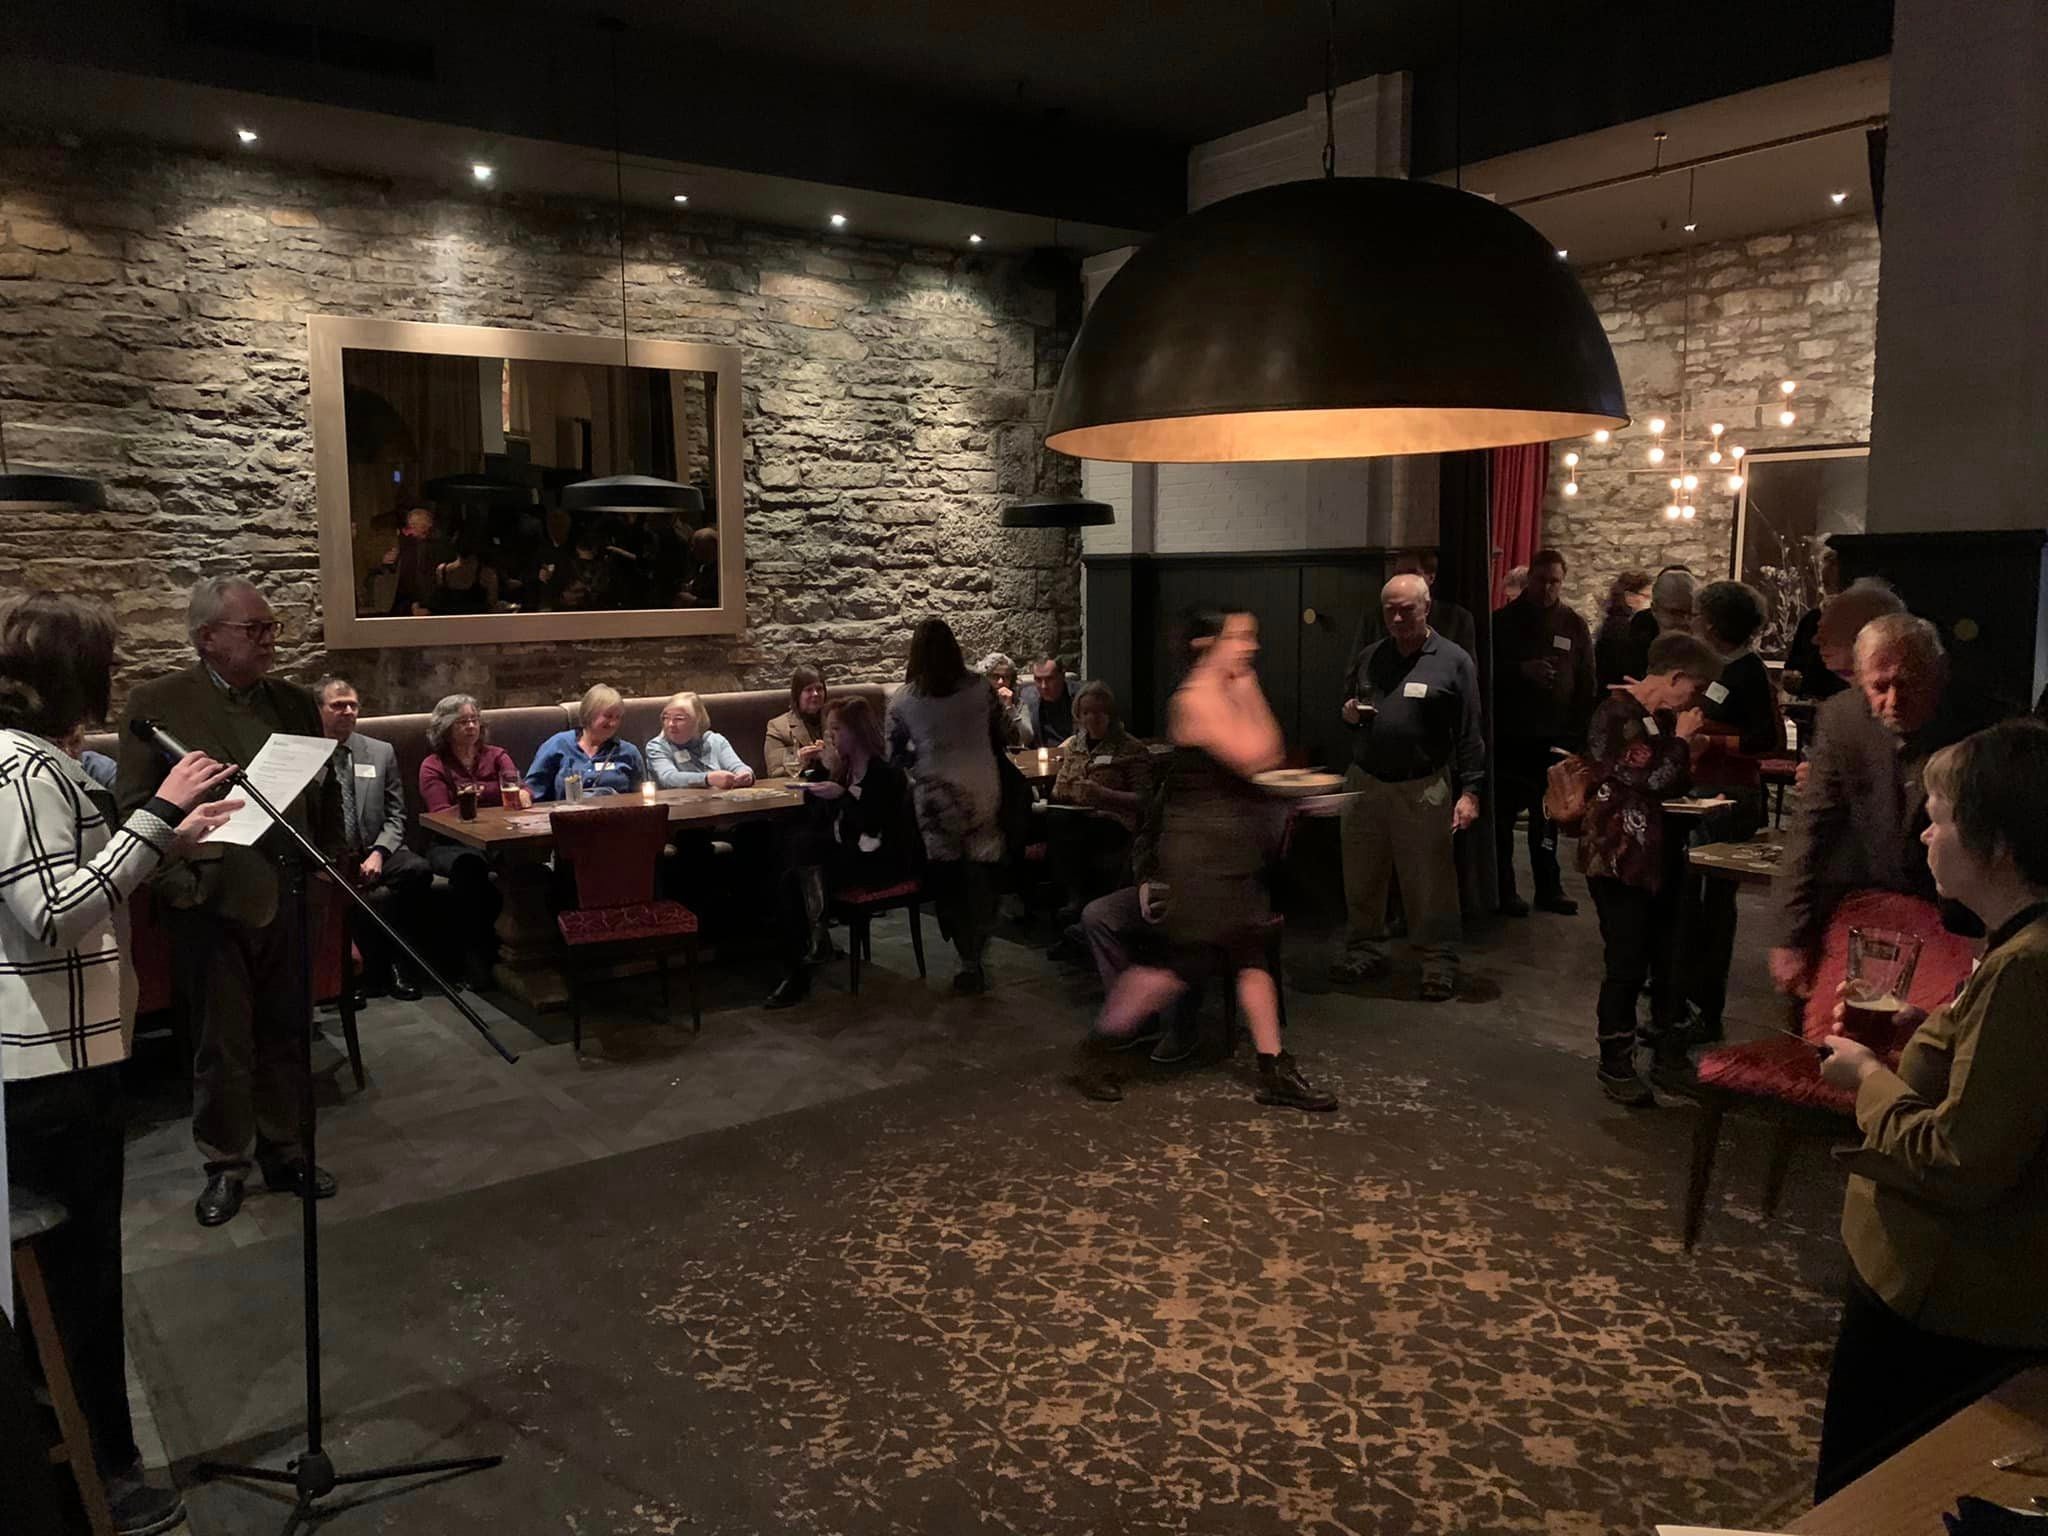 A view of the resteraunt room. It's low lit with stone walls, and a cozy vibe. The resteraunt tables along the walls are filled with alumni in conversation.